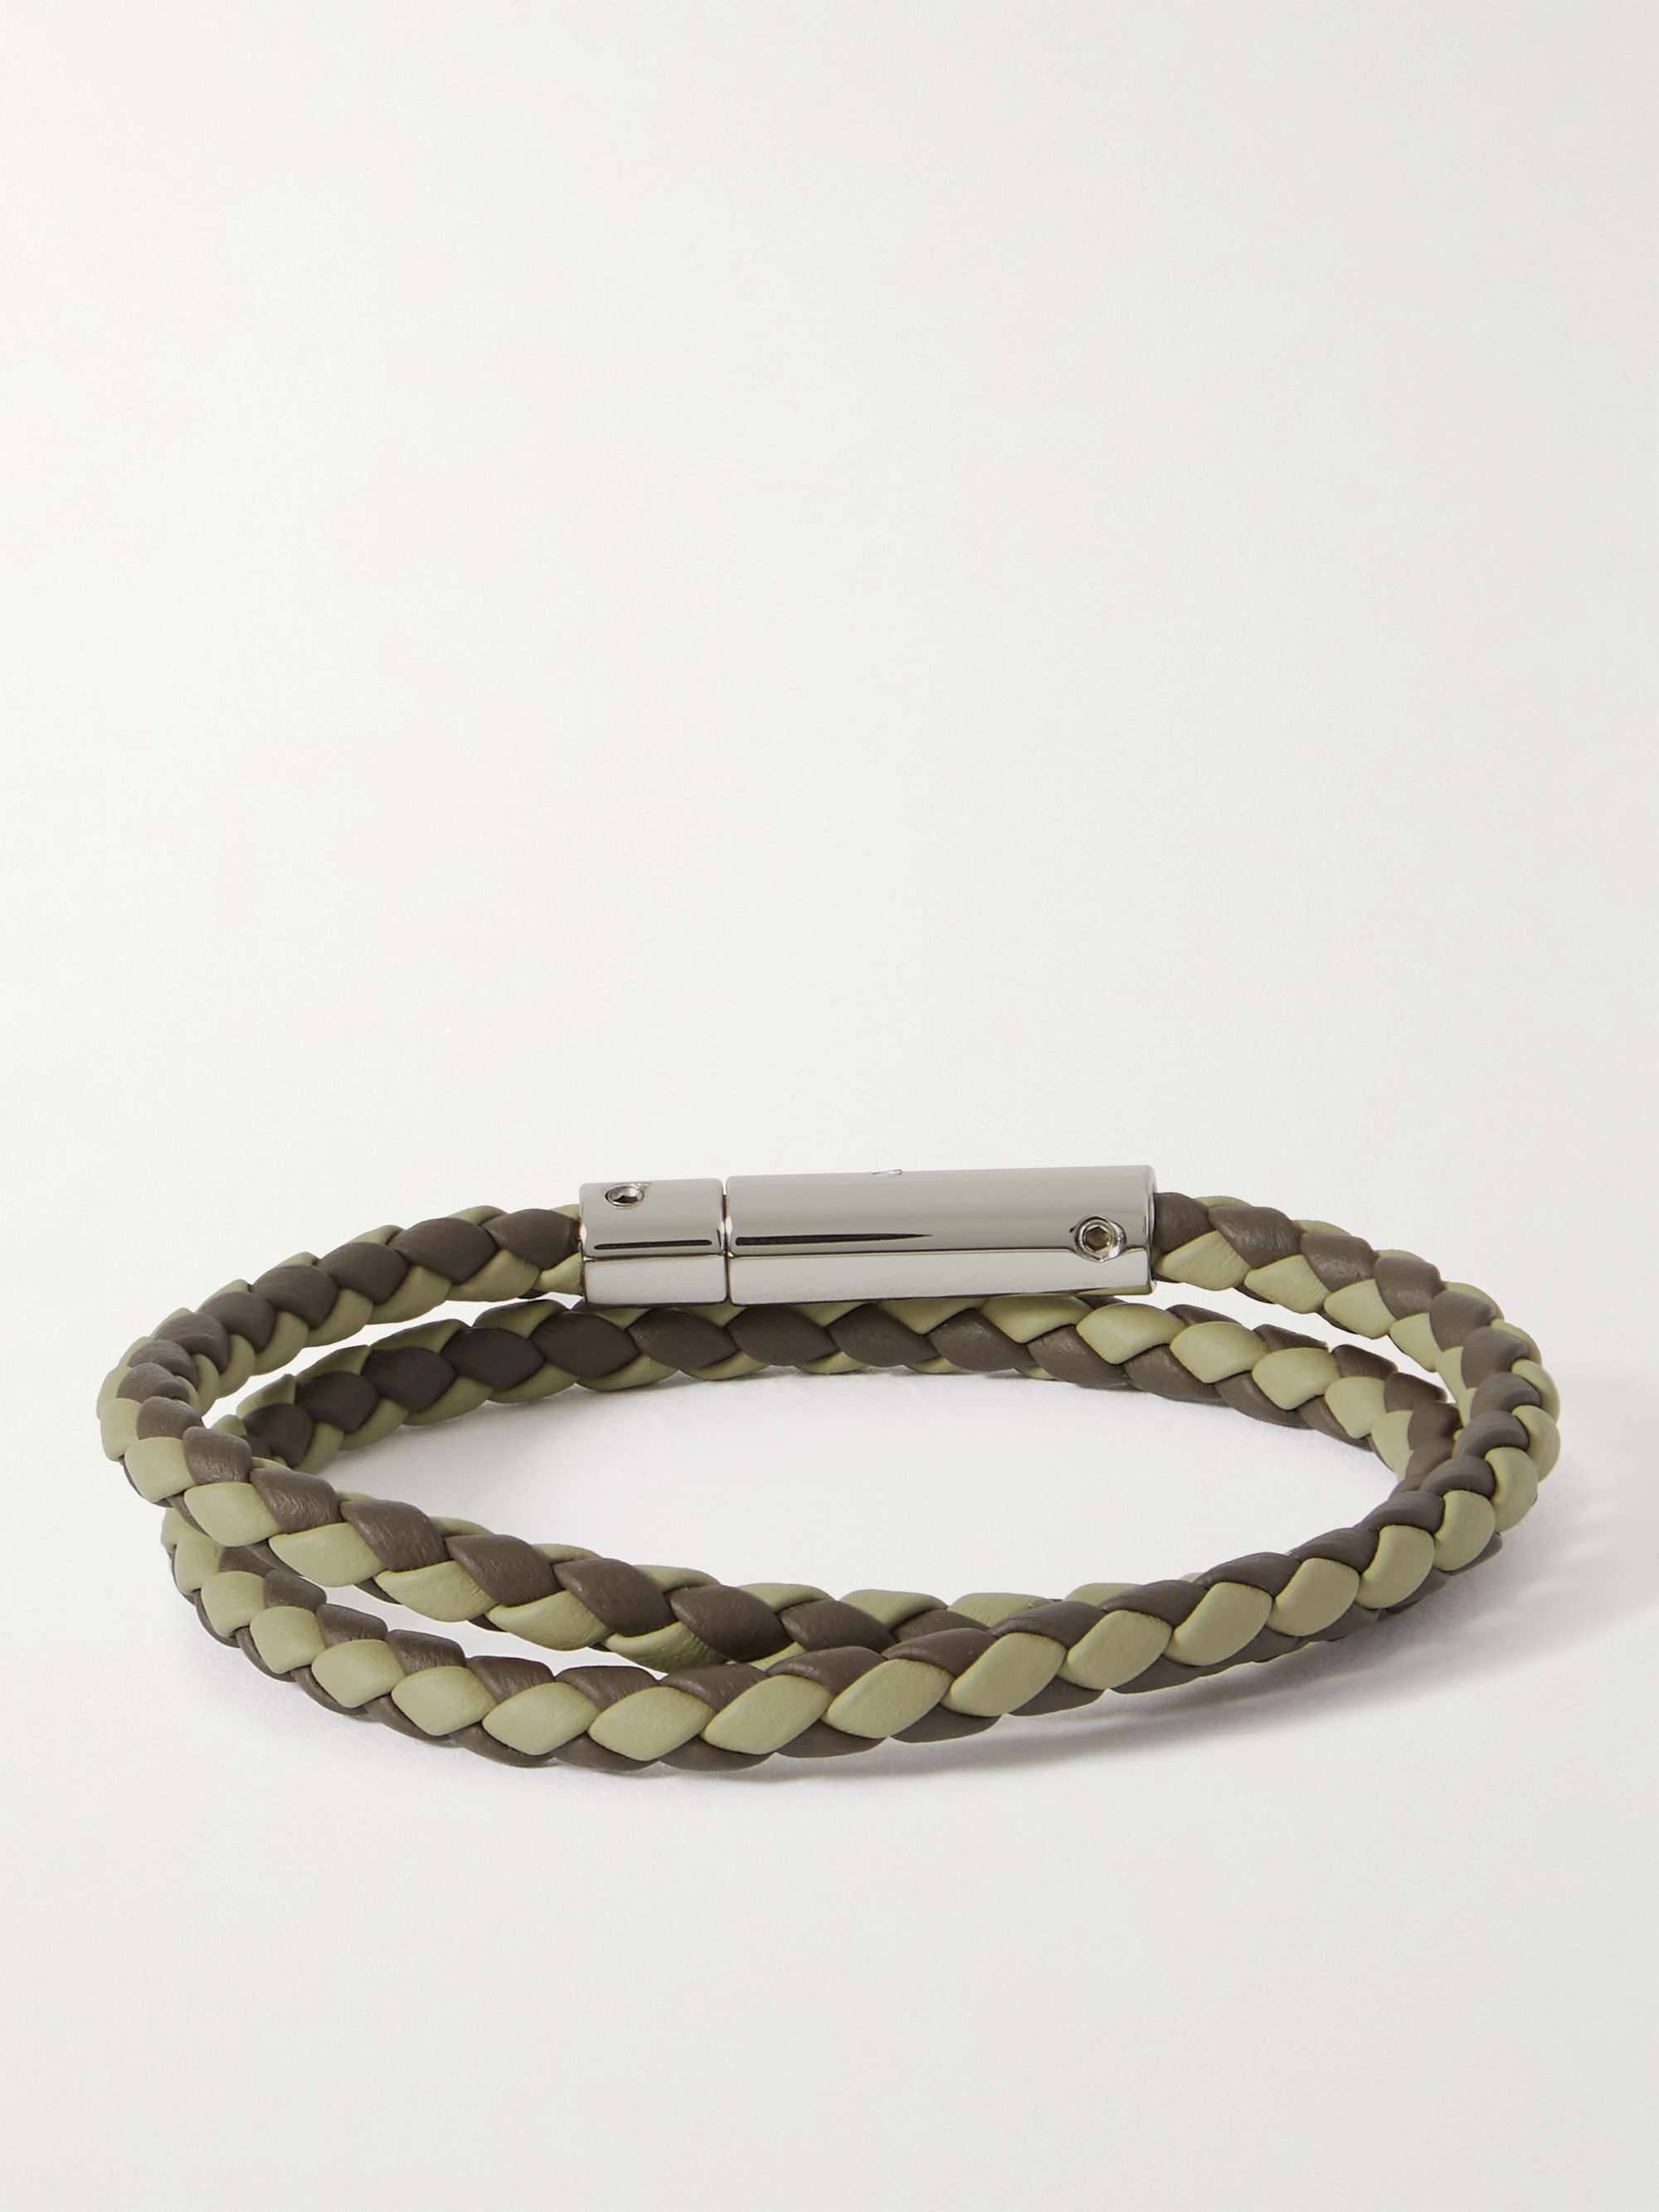 TOD'S Woven Leather and Silver-Tone Wrap Bracelet